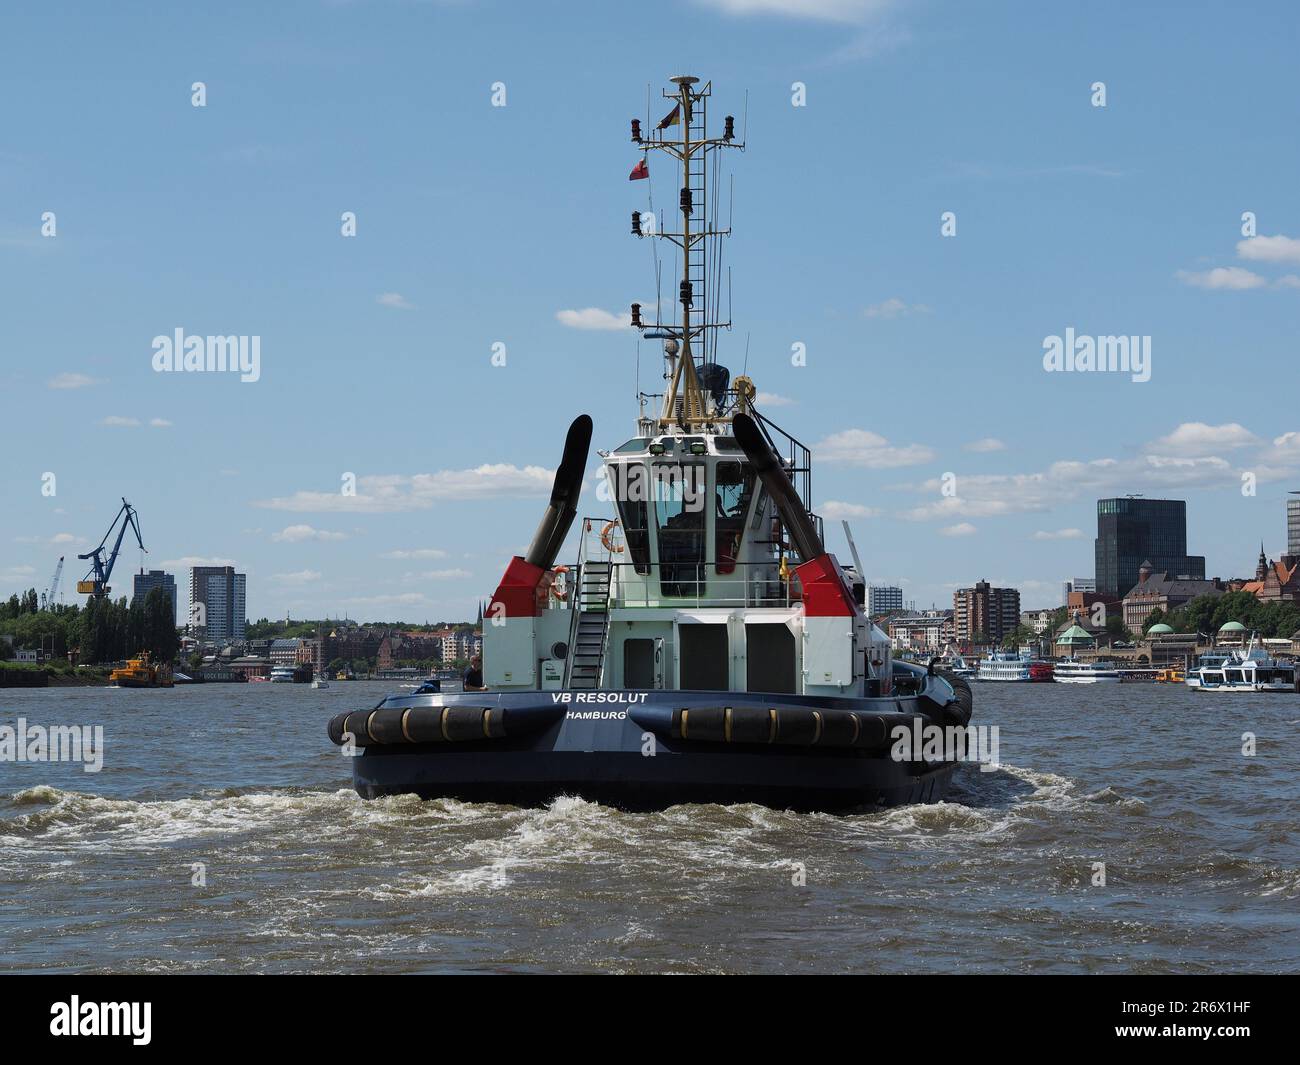 Tug boat VB Resolut in the port of Hamburg, Germany, with the city skyline in the background Stock Photo